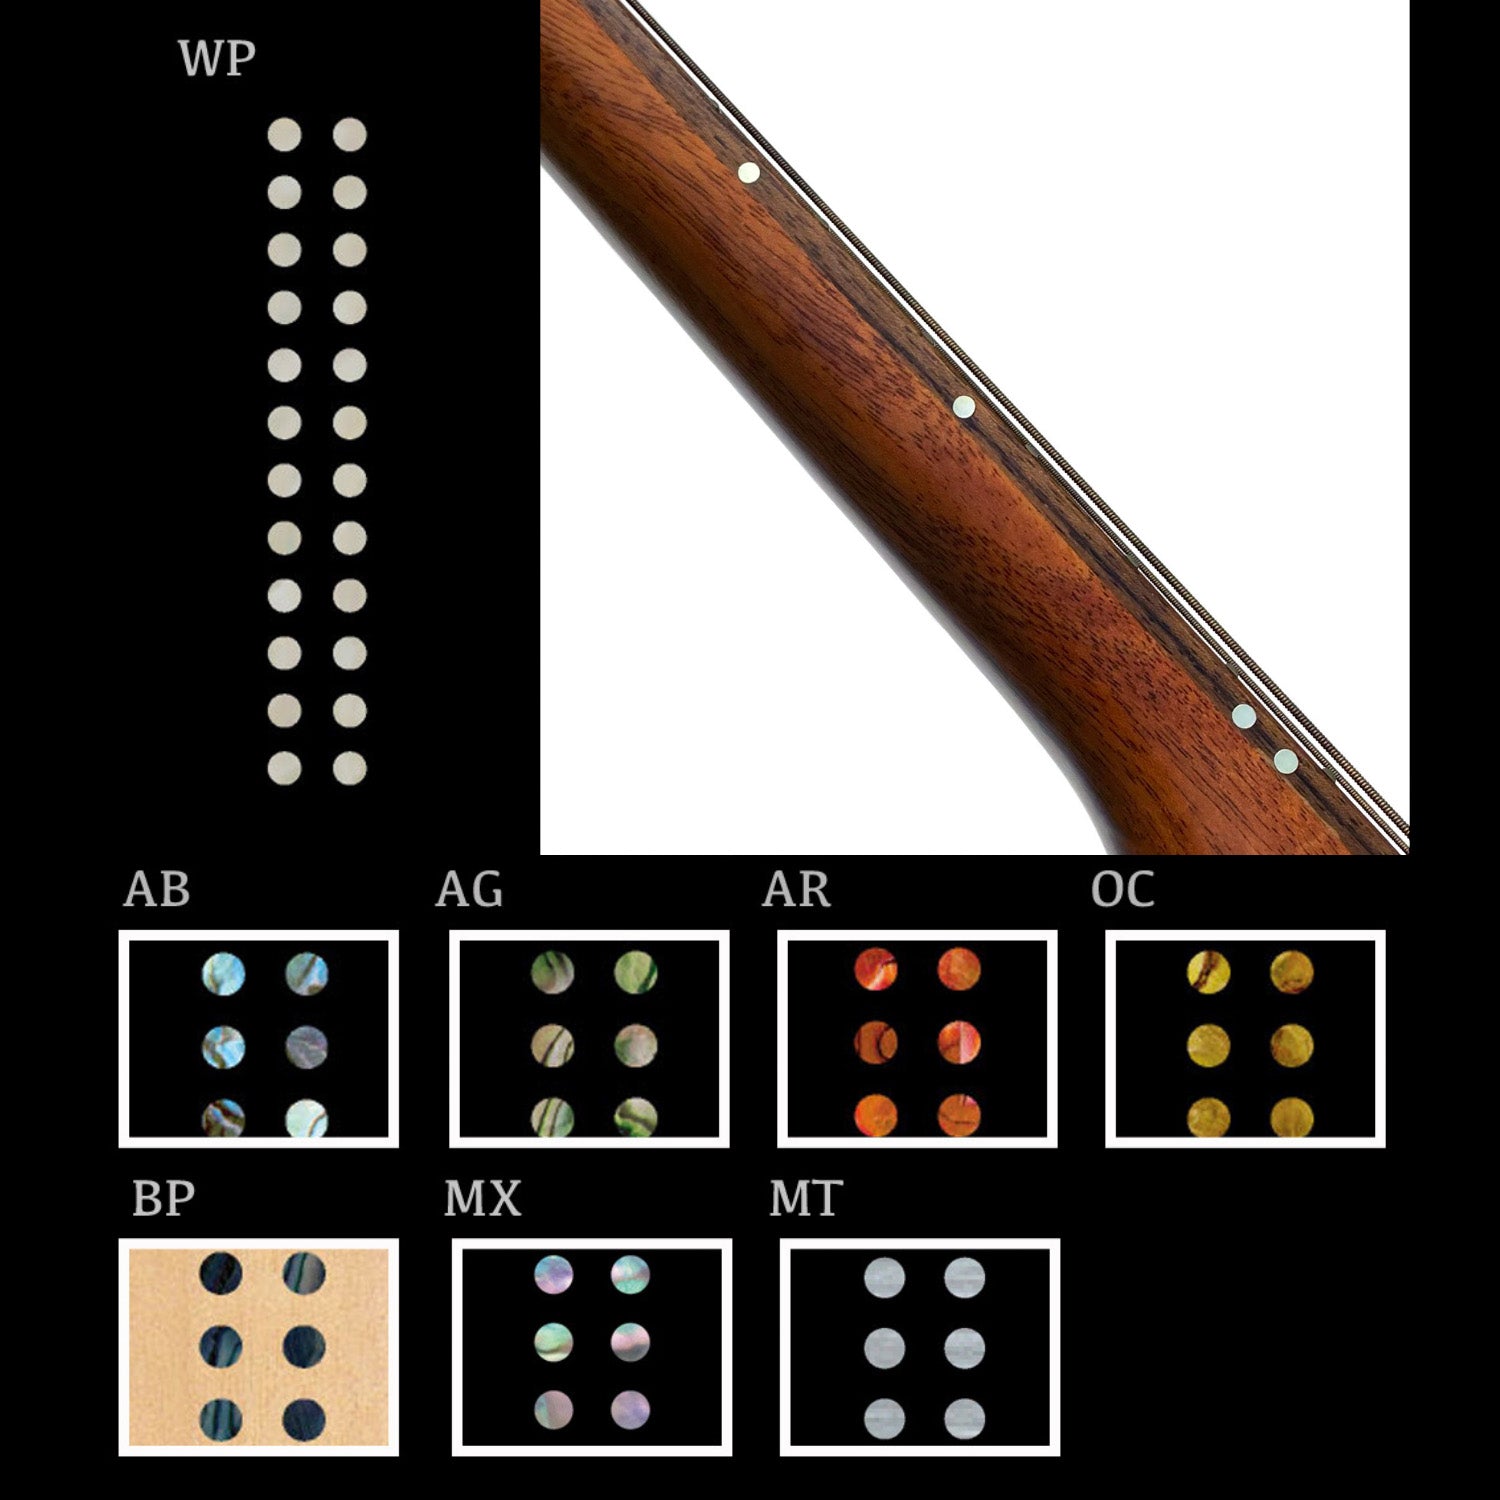 1/8 Small Side Marker Dots for Fretboards BP (Black Pearl)